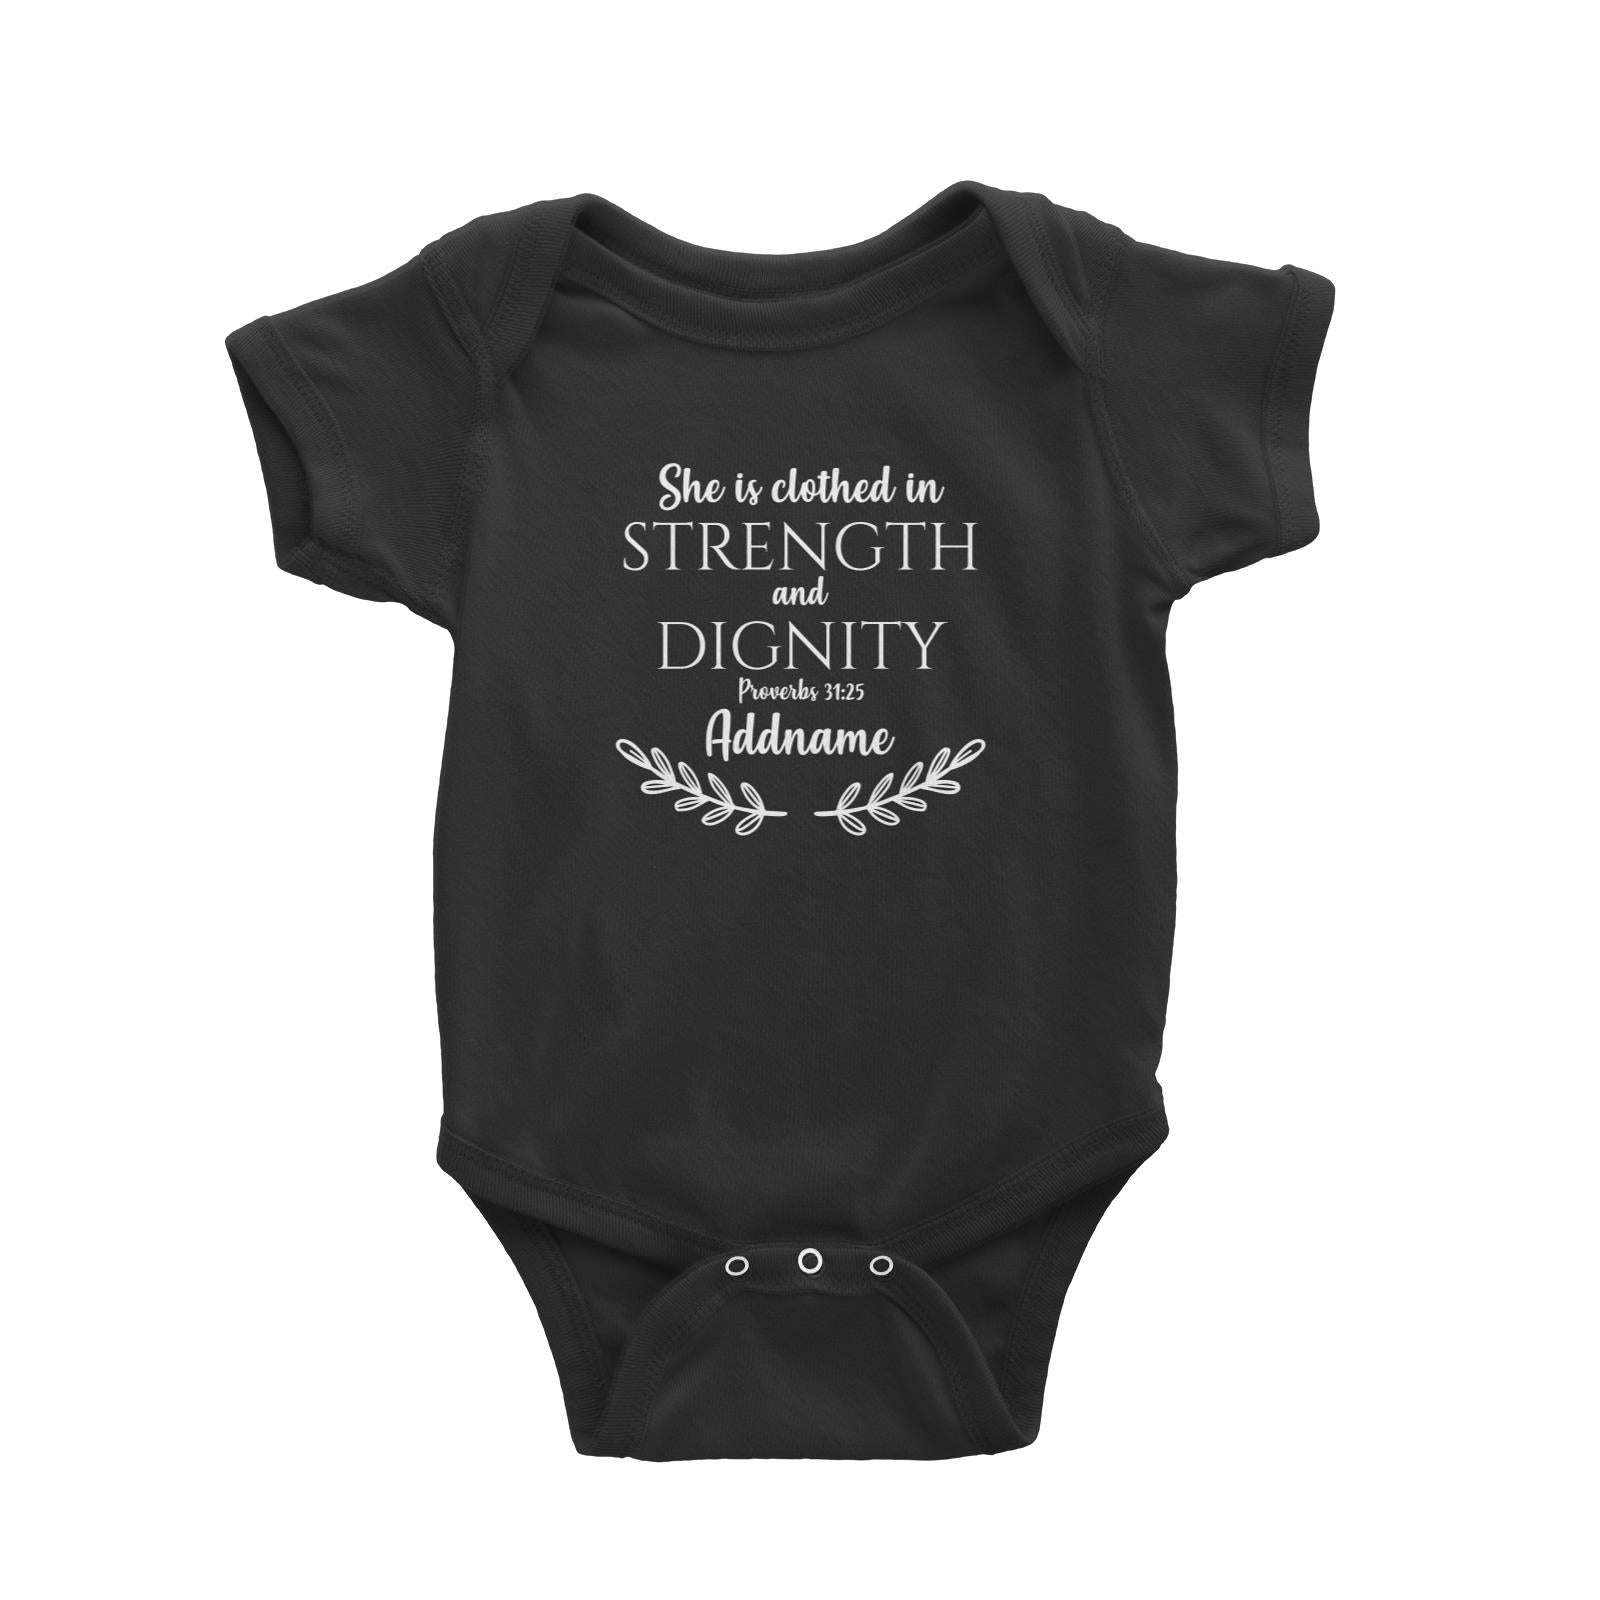 Christian For Her She Is Clothed in Strength and Dignity Proverbs 31.25 Addname Baby Romper